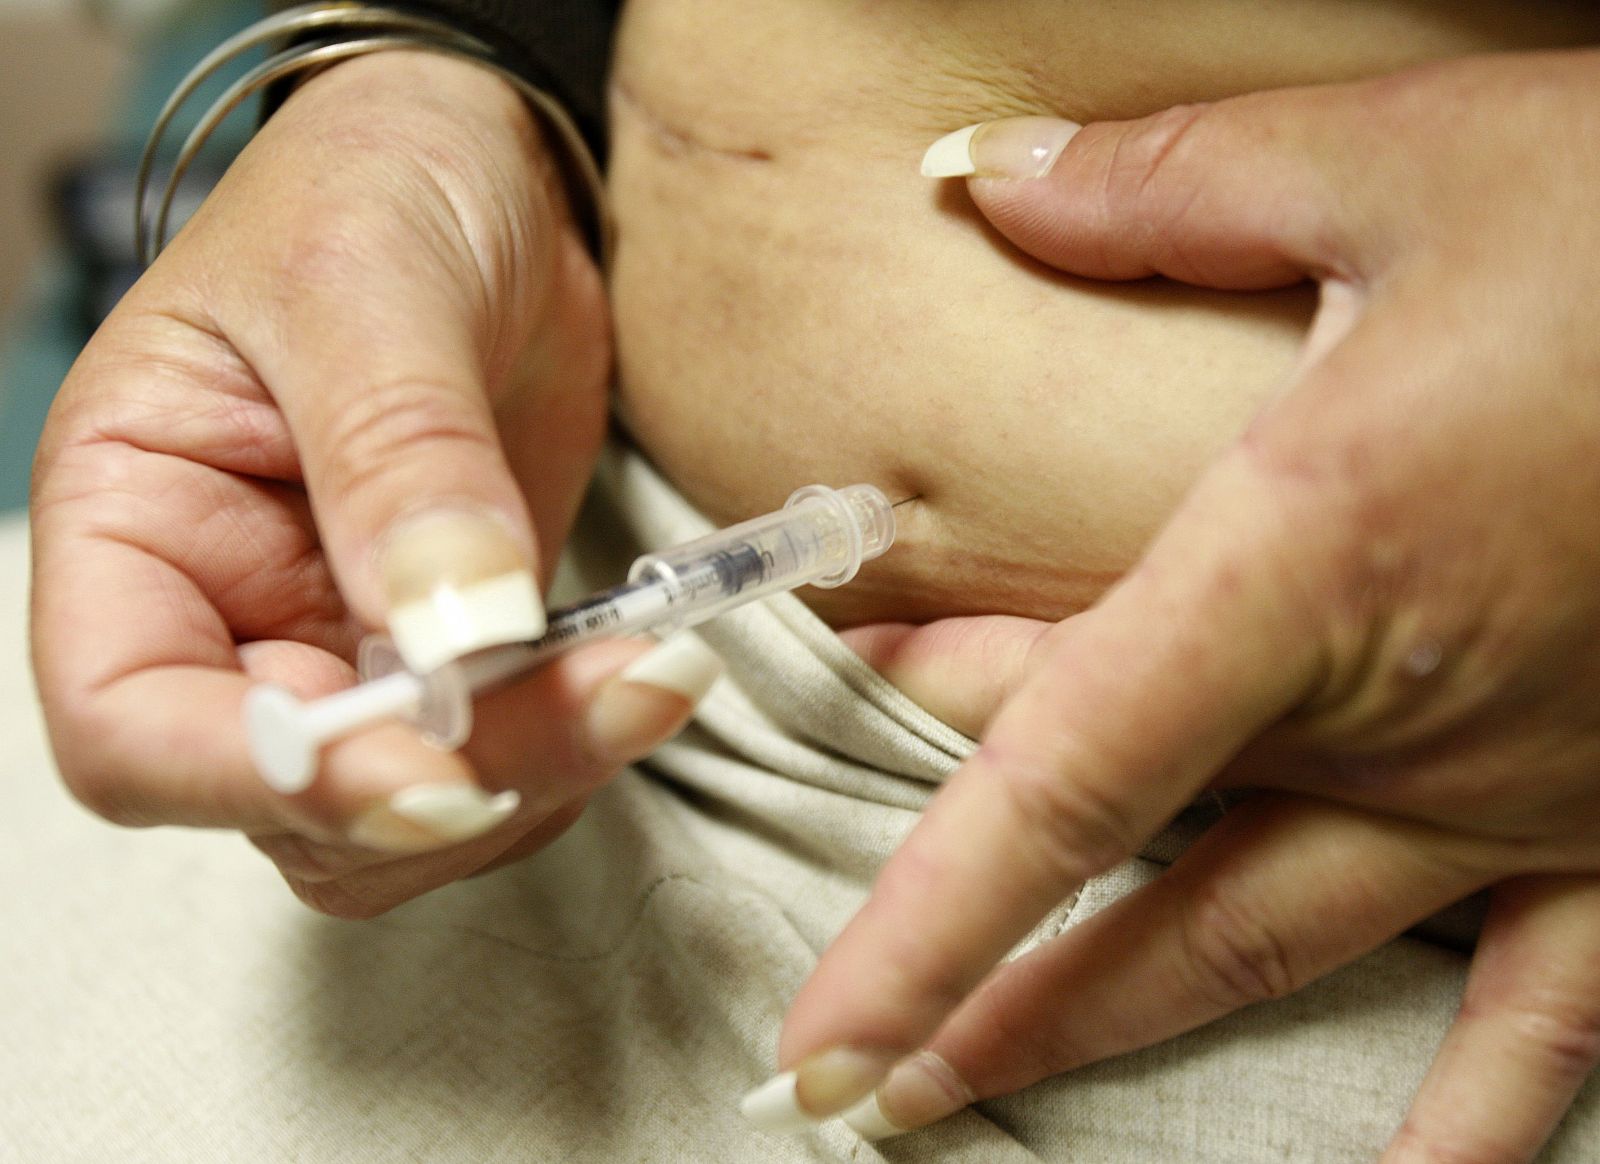 File photo of diabetic Khachatoorian injecting herself with insulin at the J.W.C.H. safety-net clinic in downtown Los Angeles